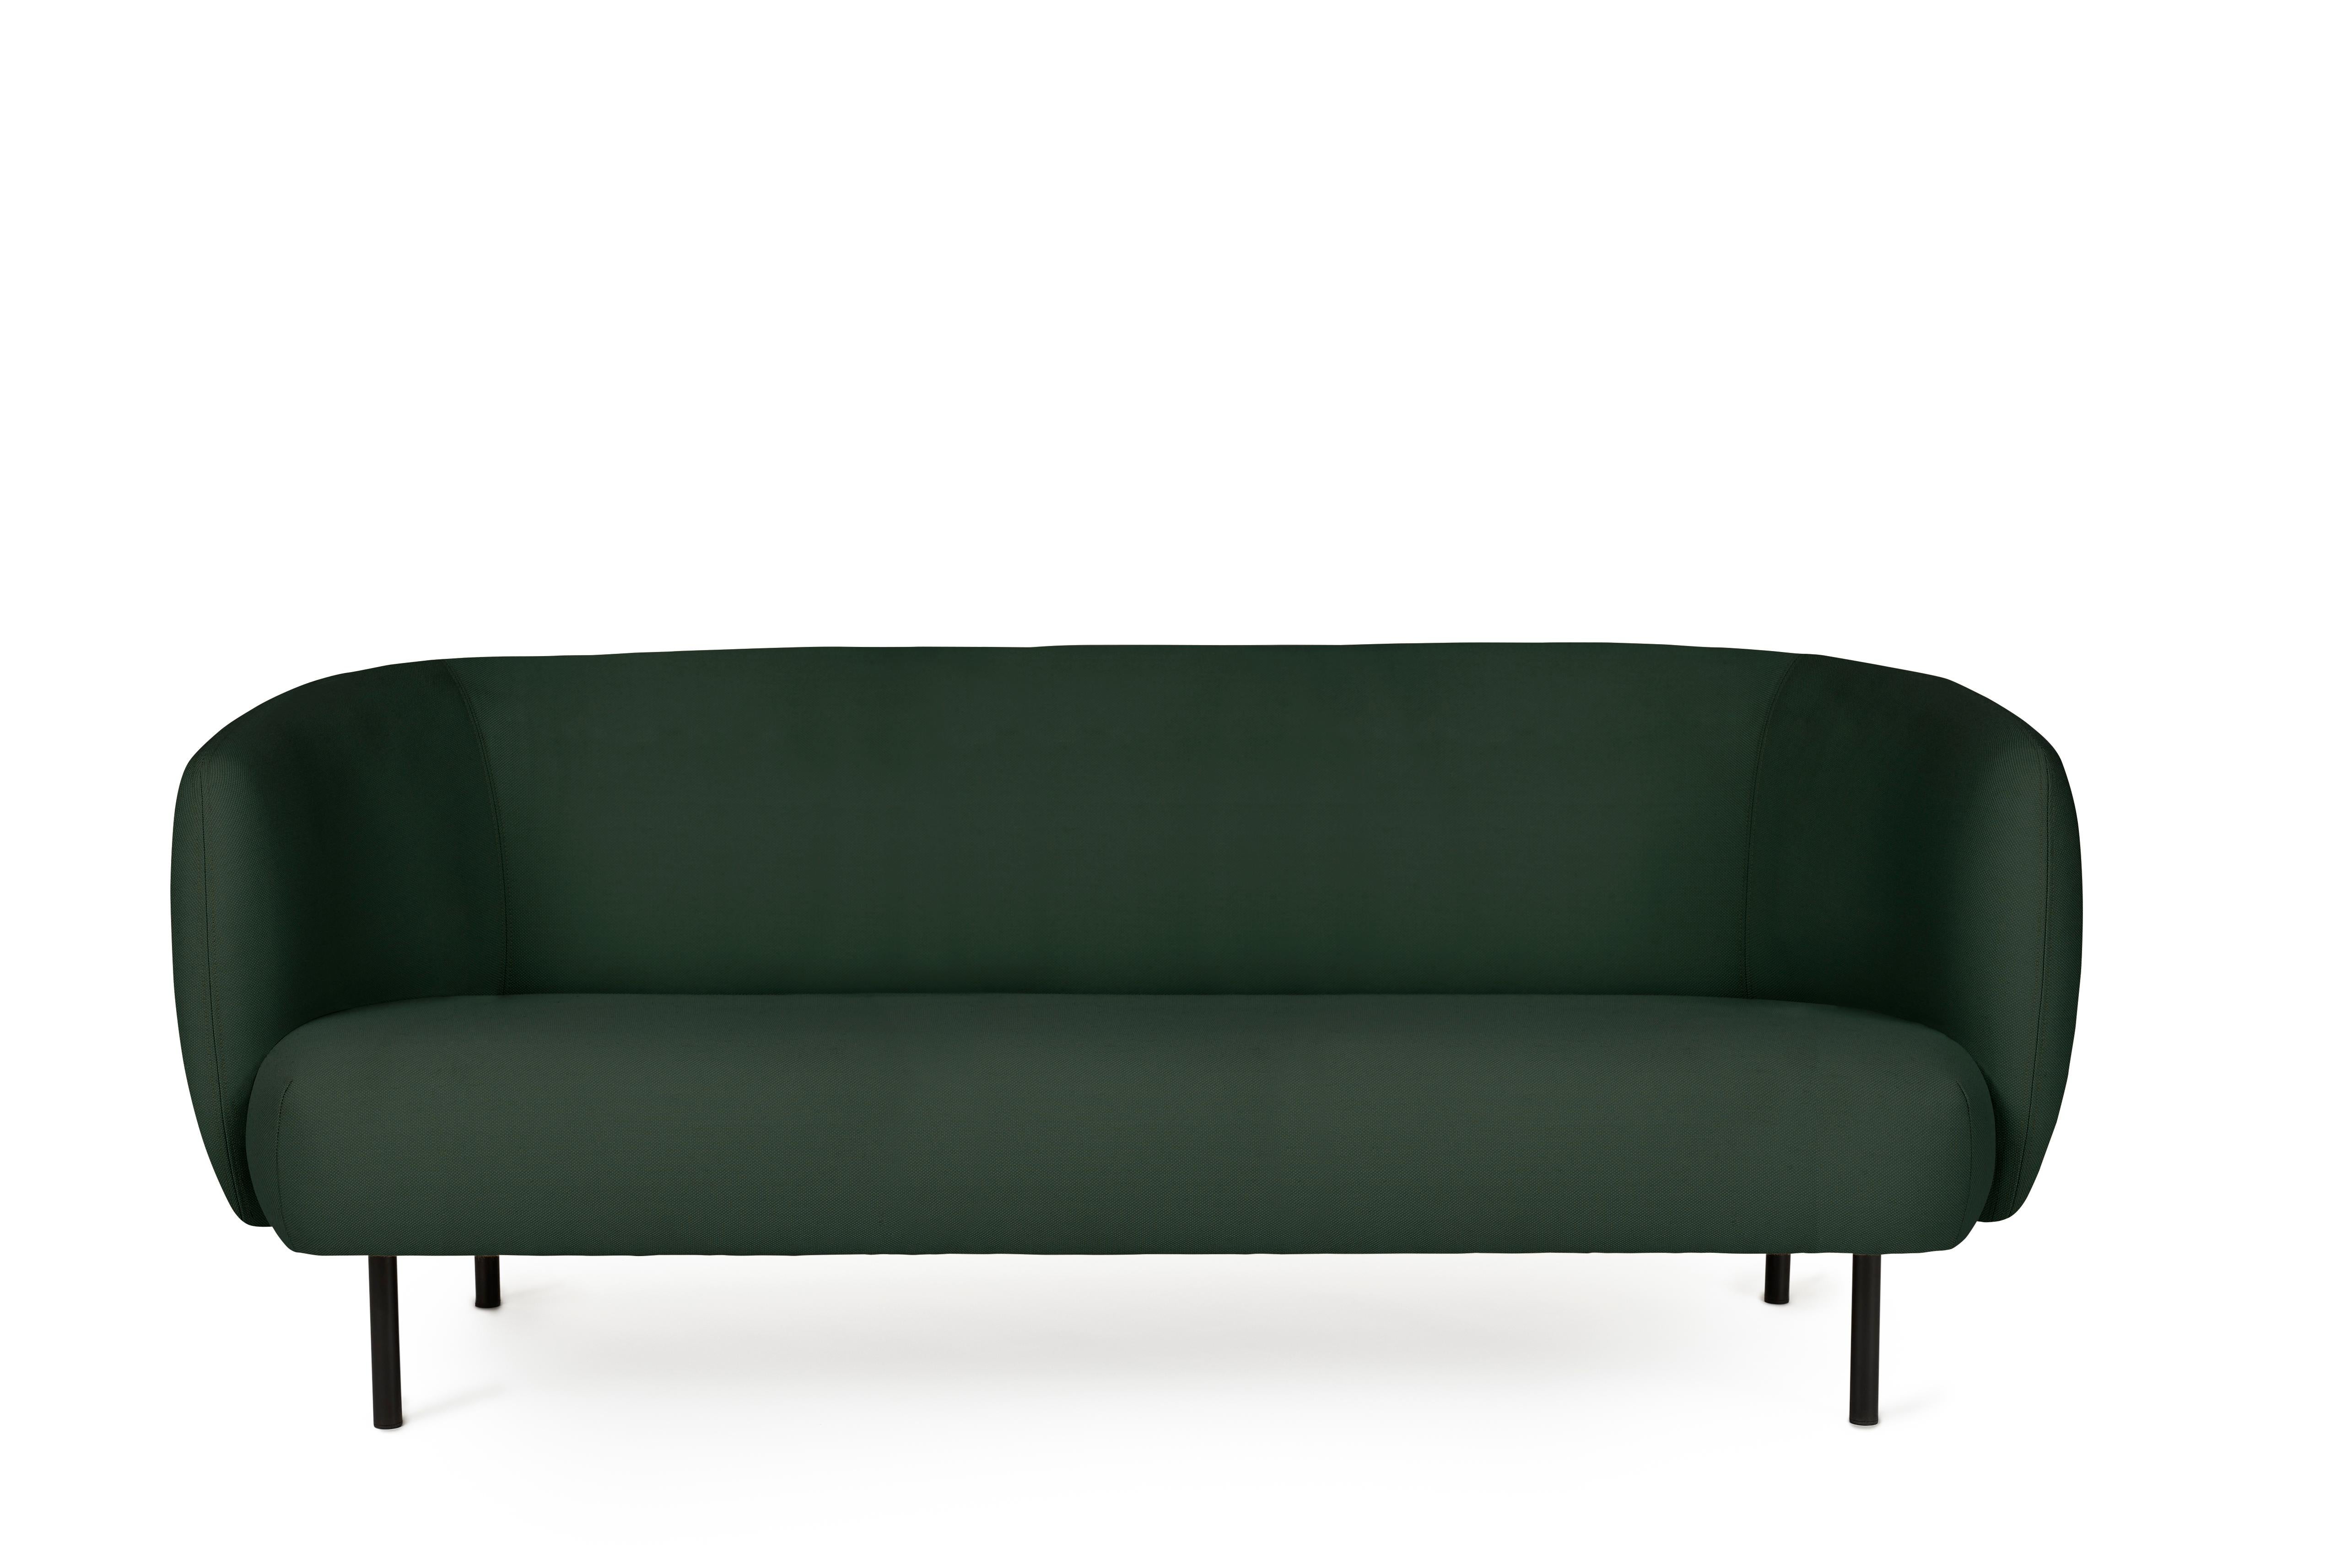 For Sale: Green (Steelcut 975) Cape 3-Seat Sofa, by Charlotte Høncke from Warm Nordic